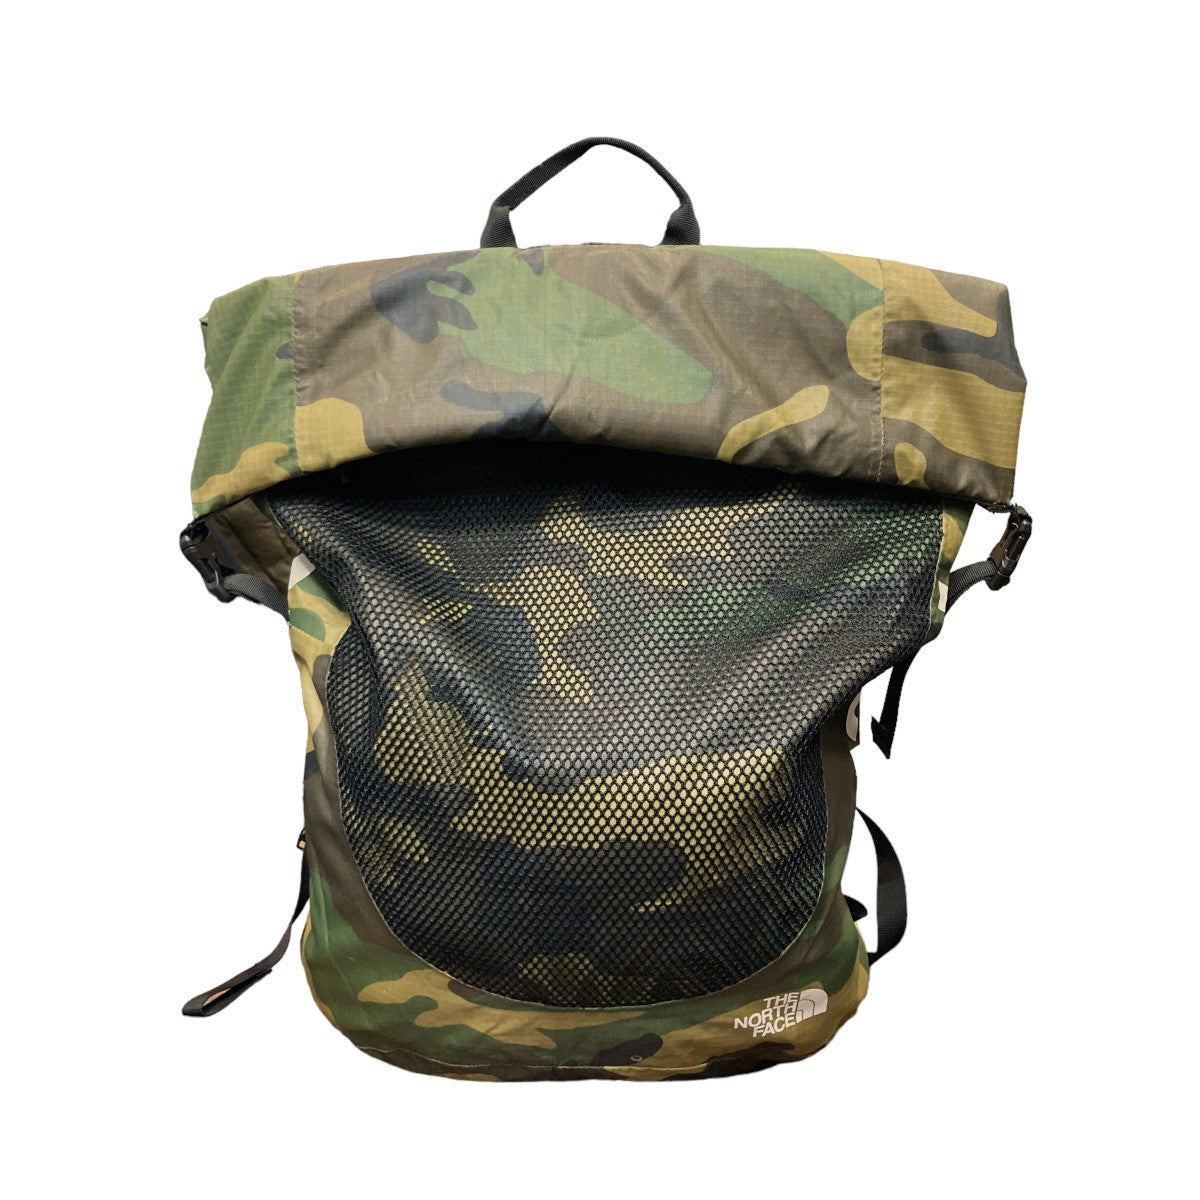 AprilroofsSupreme North Face Waterproof Backpack3